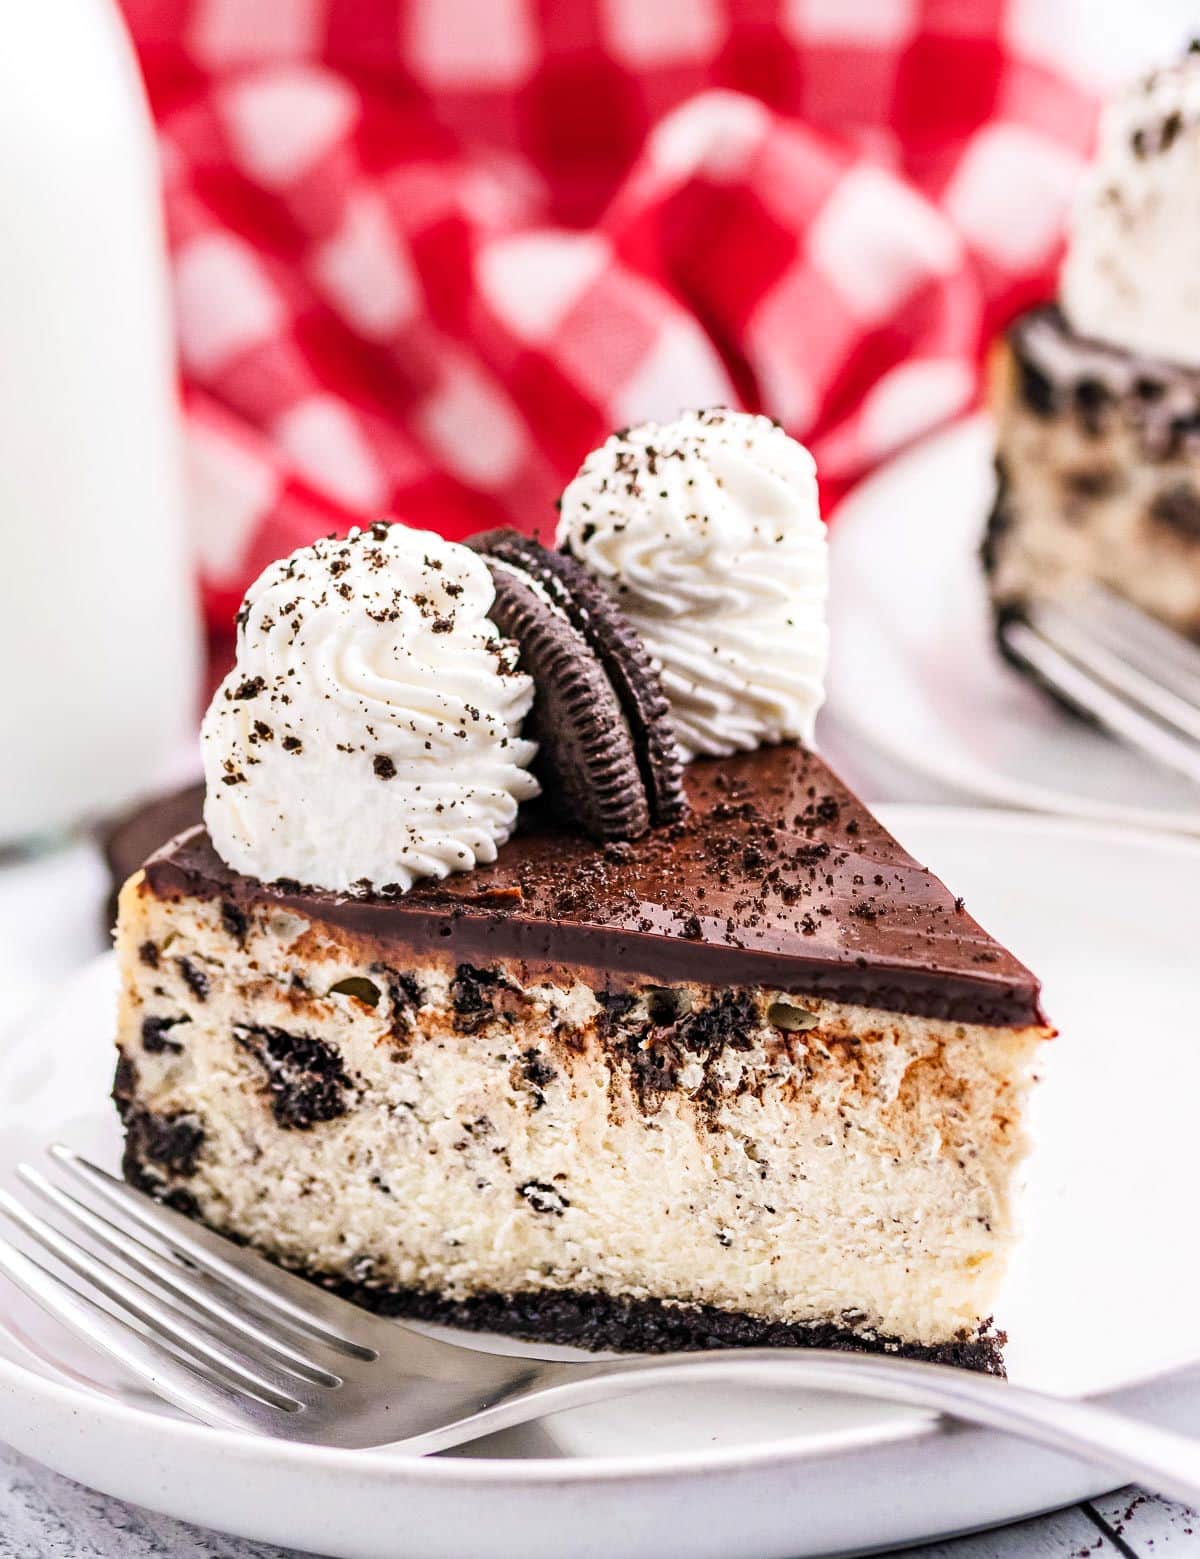 slice or oreo cheesecake sitting on white plate with red checkered napkin in background.